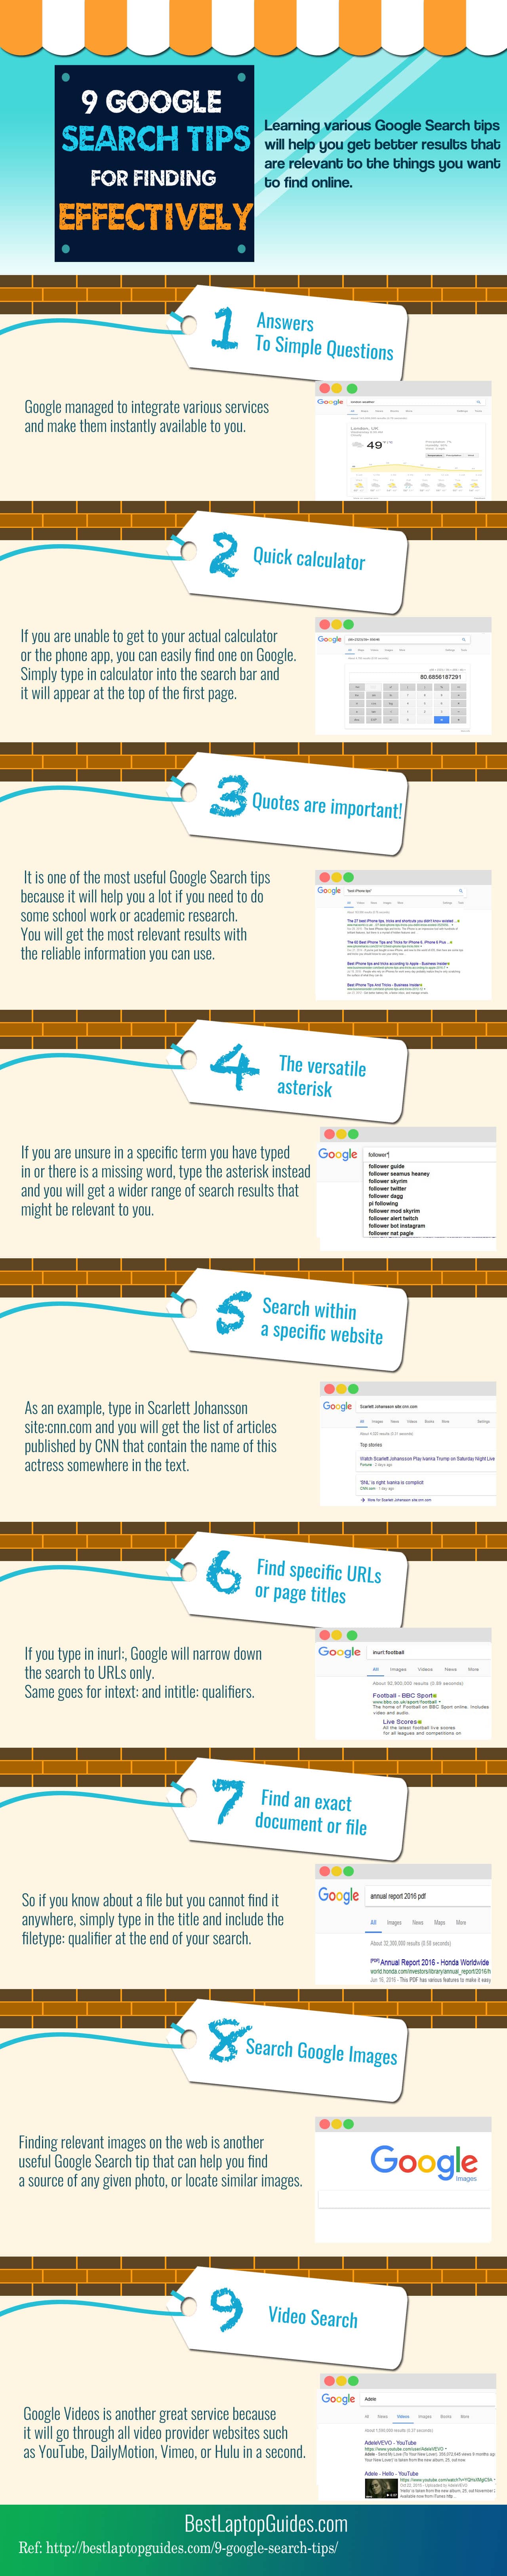 9 Google Search Tips For Finding Effectively